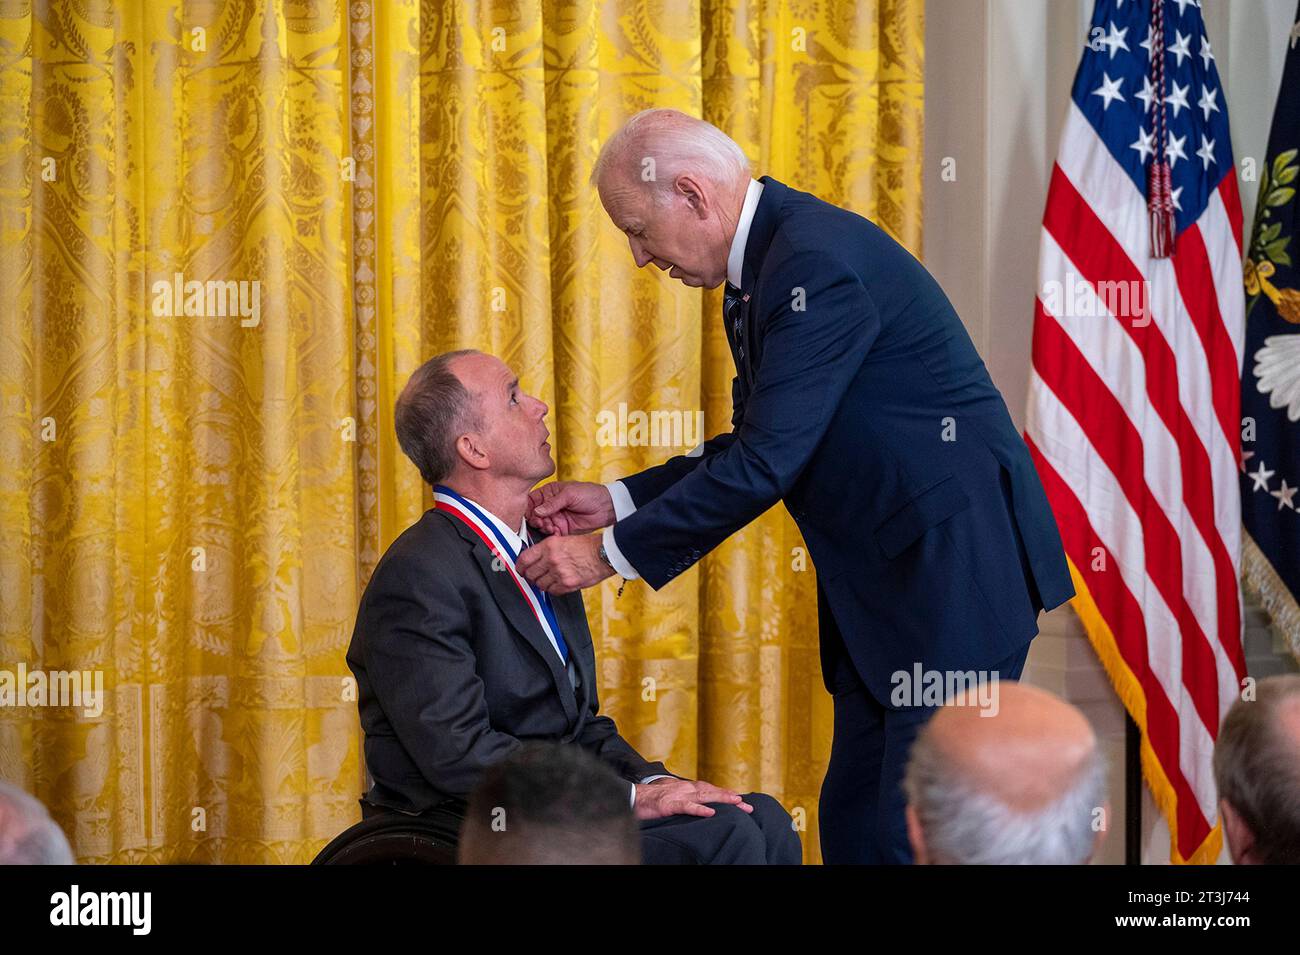 Washington, United States. 24th Oct, 2023. U.S President Joe Biden, center, presents the National Medal of Technology and Innovation to Dr. Rory Cooper, left, during a ceremony in the East Room of the White House, October 24, 2023 in Washington, DC Credit: Christopher Kaufmann/U.S. Army Photo/Alamy Live News Stock Photo